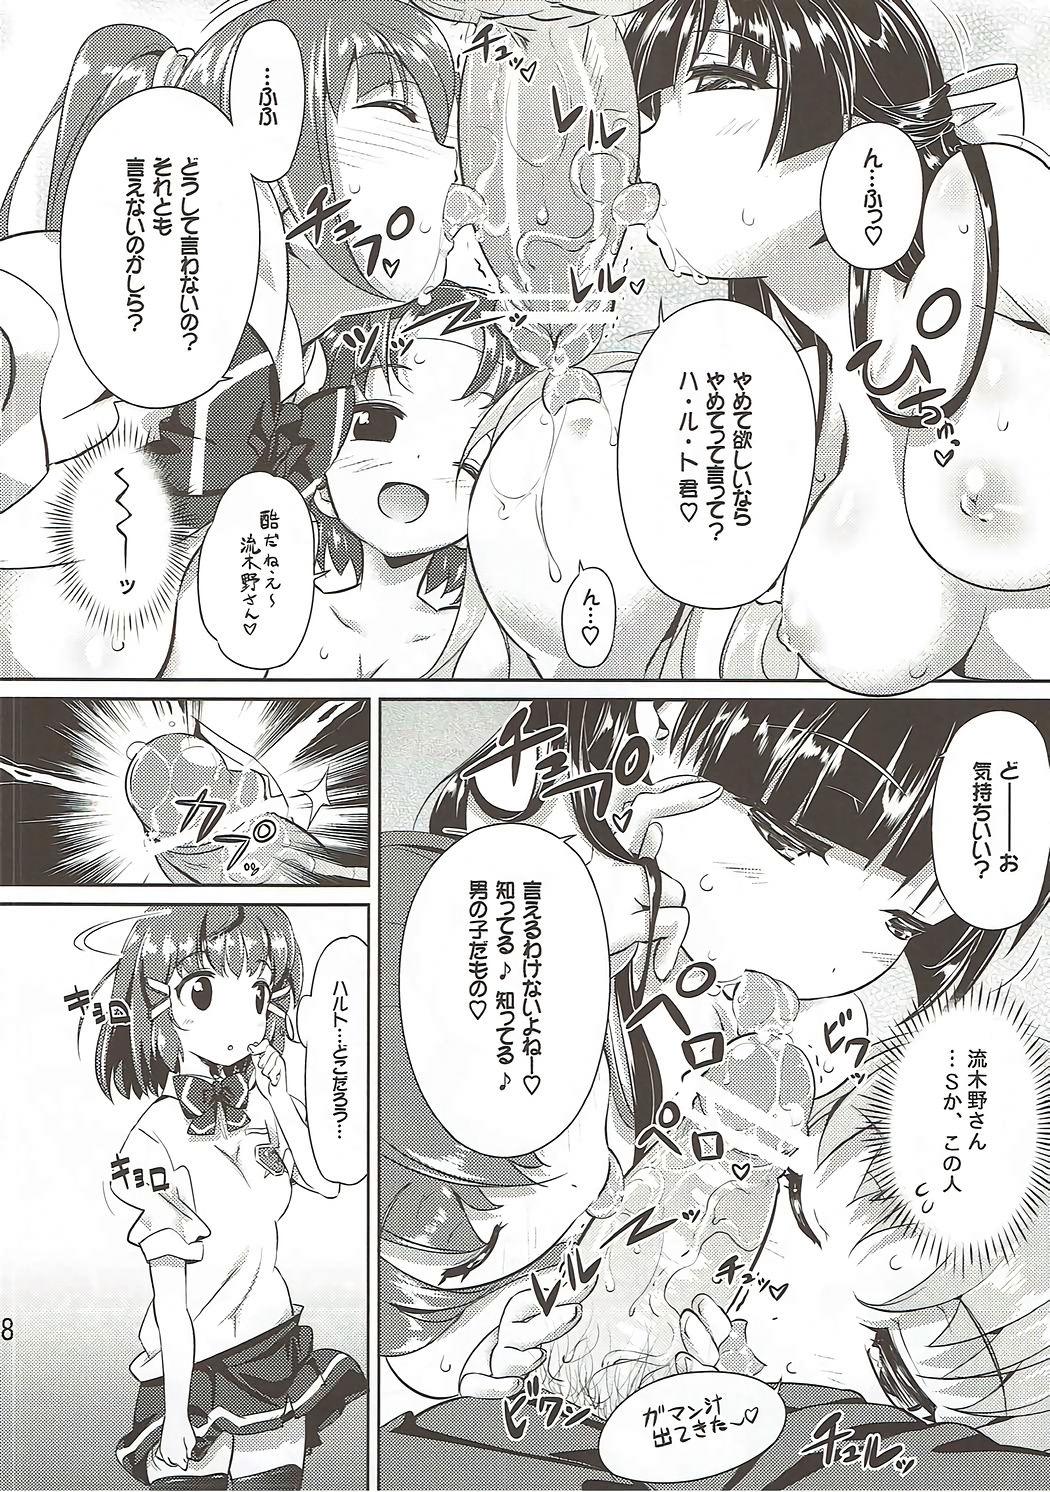 Yanks Featured Nakayoku Sex - Valvrave the liberator Rough - Page 7